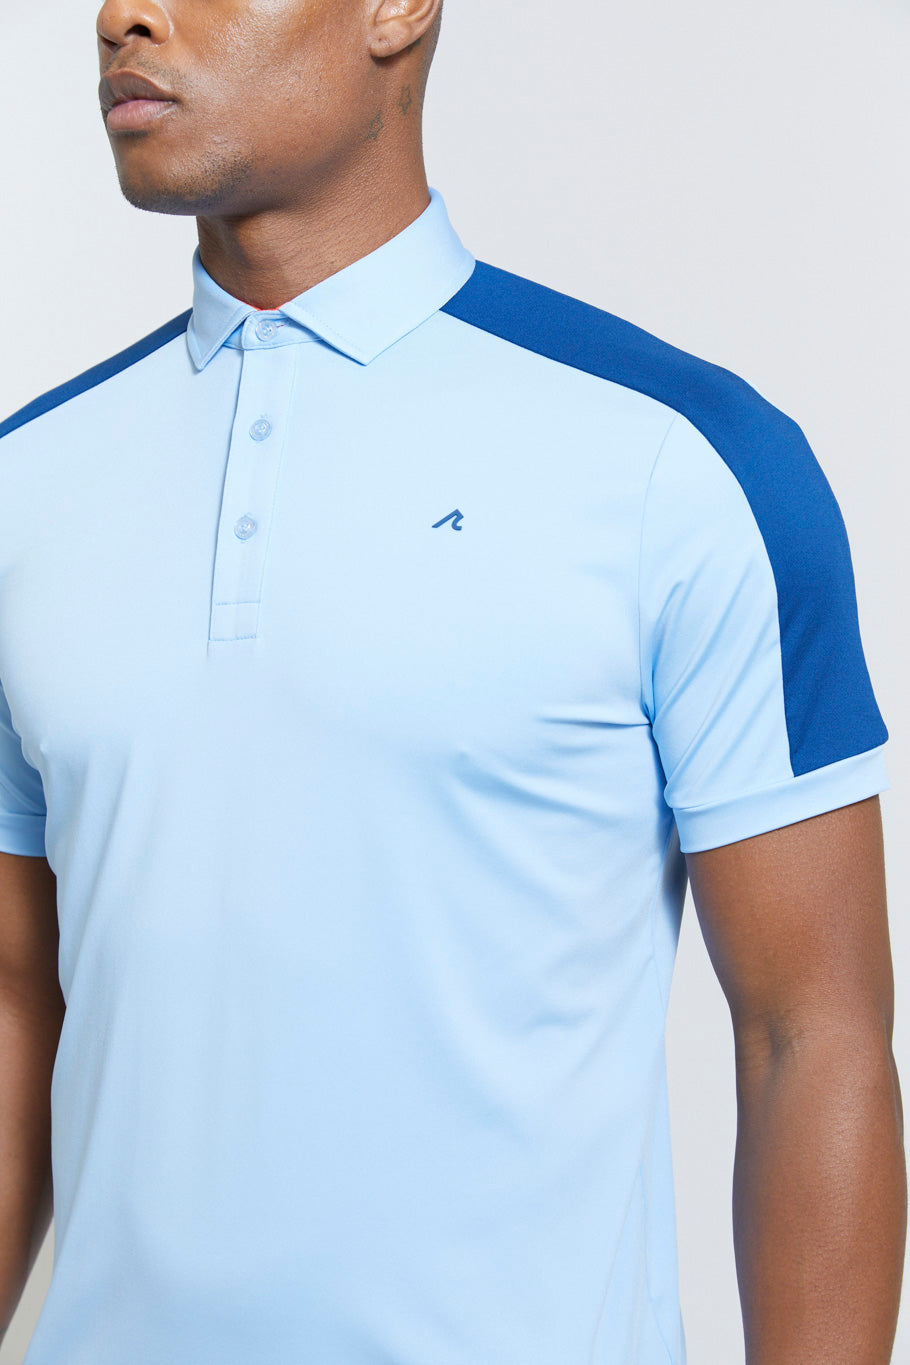 Image of the evans polo in skydiver ss23